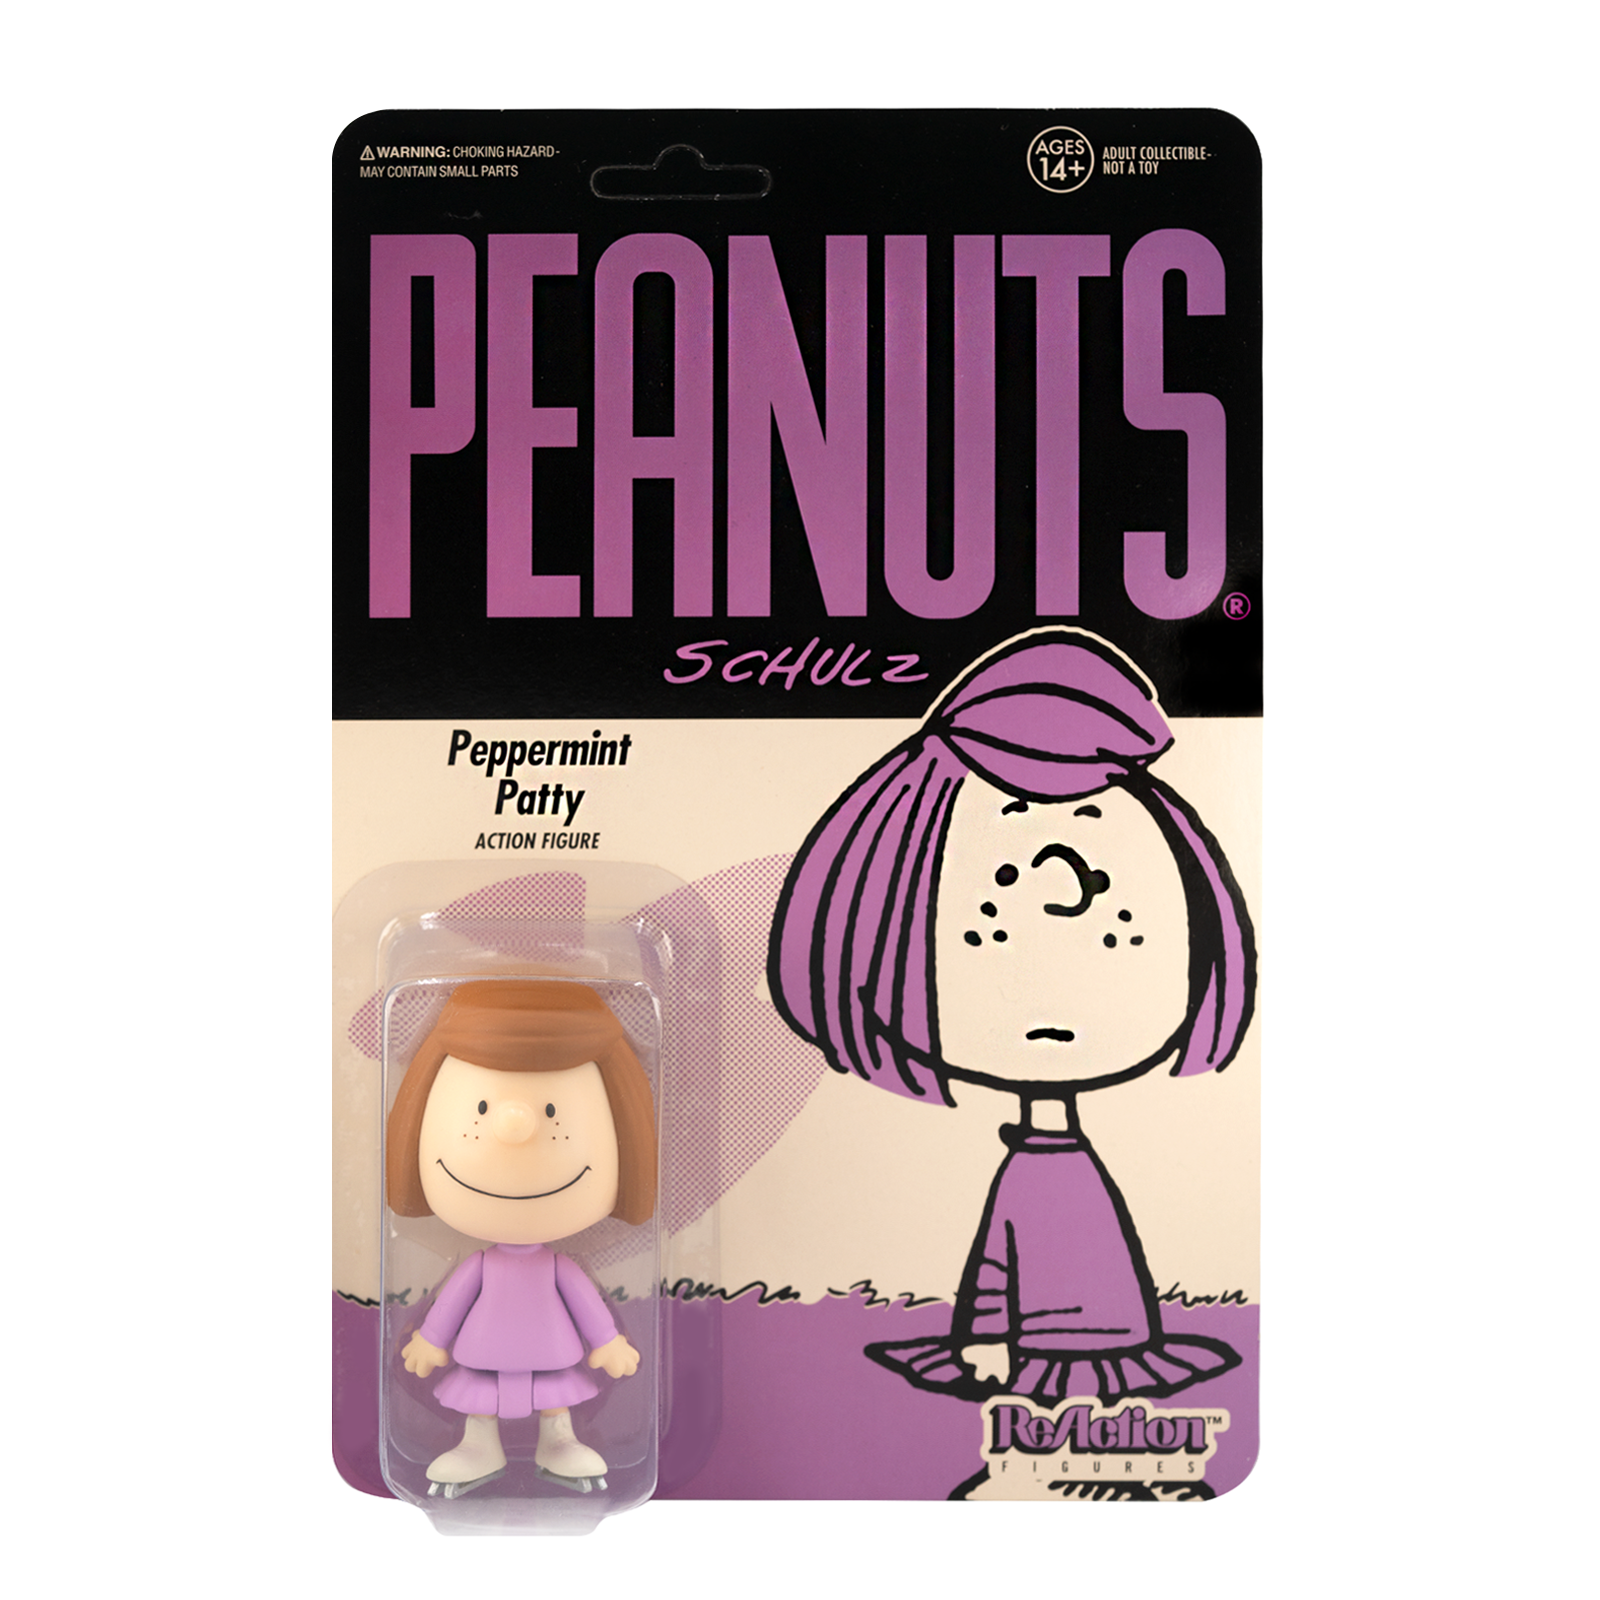 Peanuts ReAction Wave 2 - Peppermint Patty